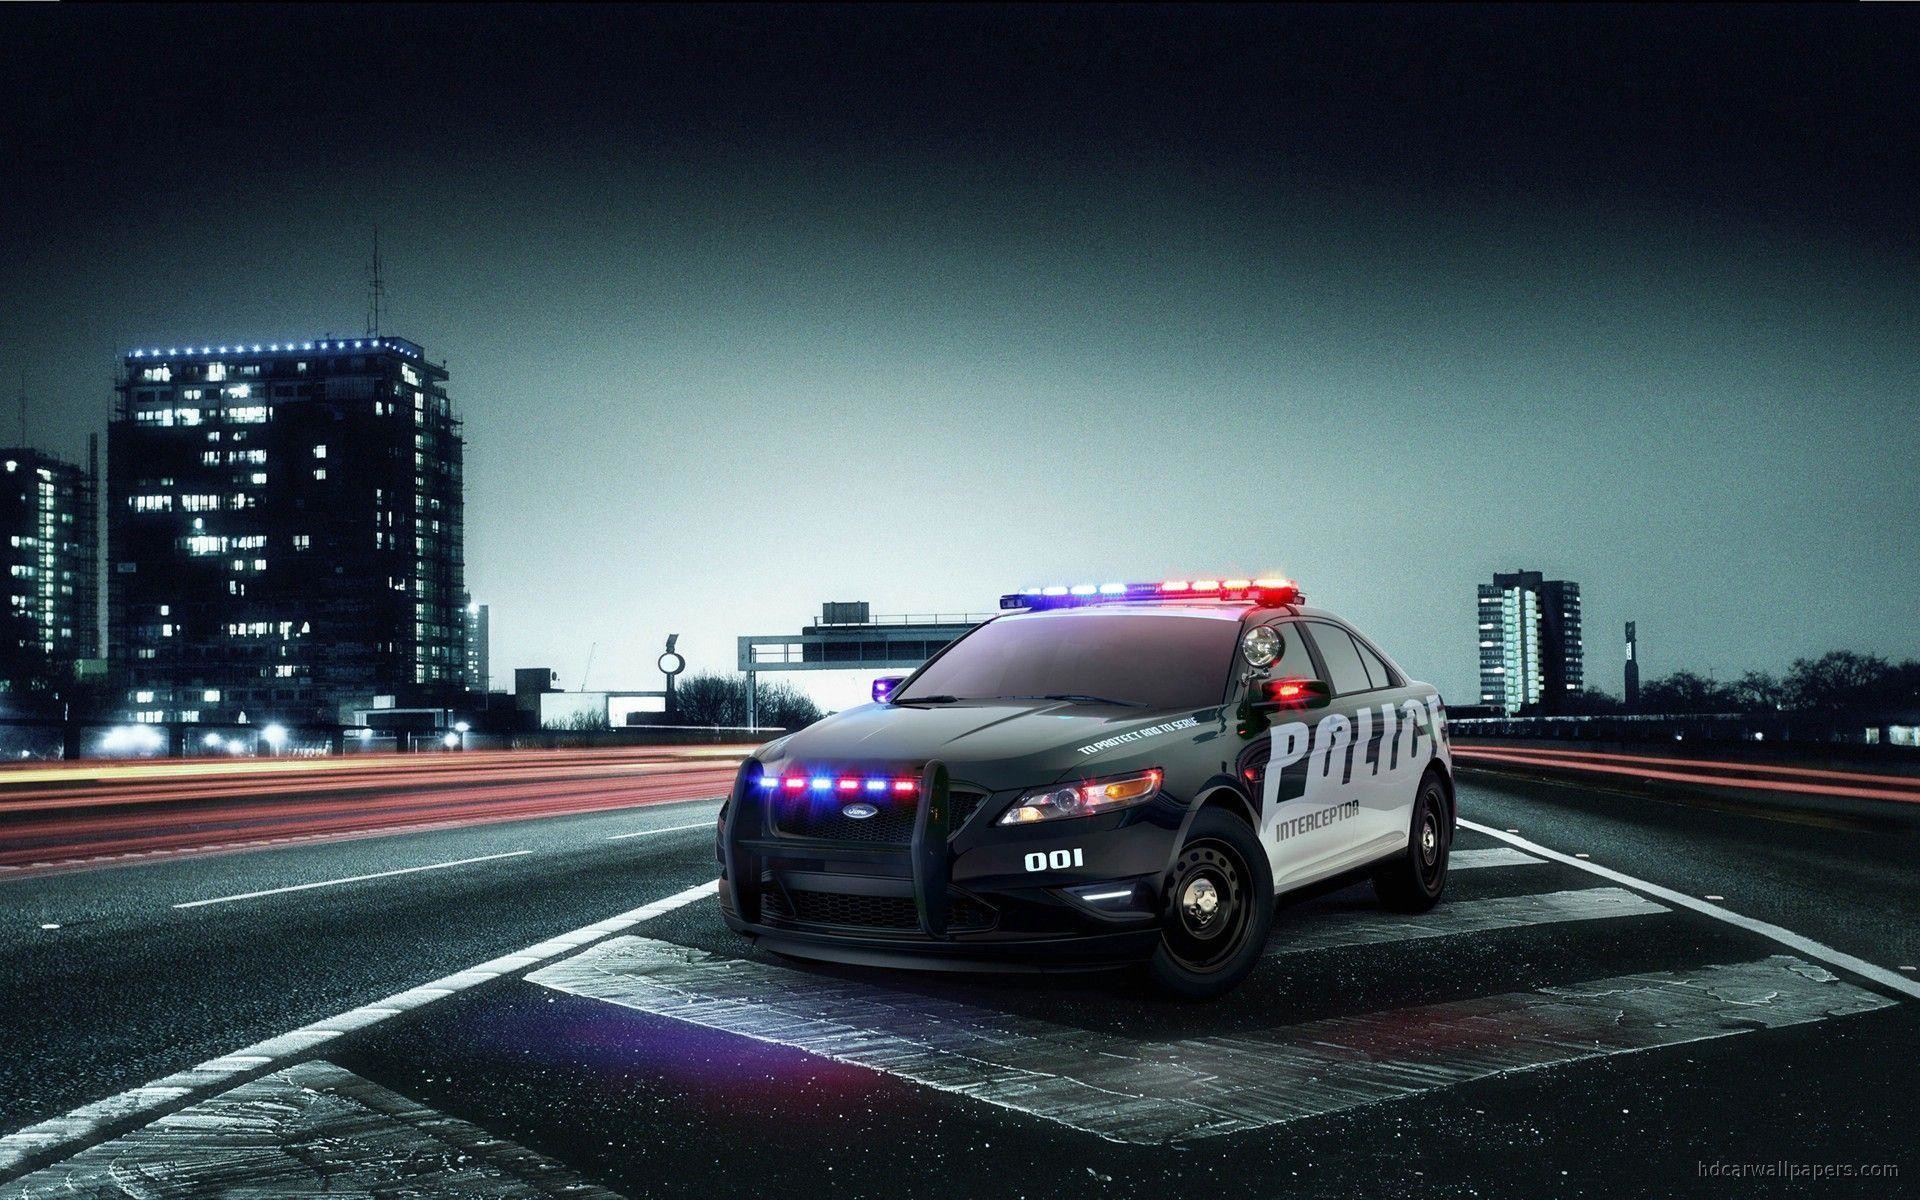 Wallpapers Tagged With POLICE | POLICE Car Wallpapers, Images